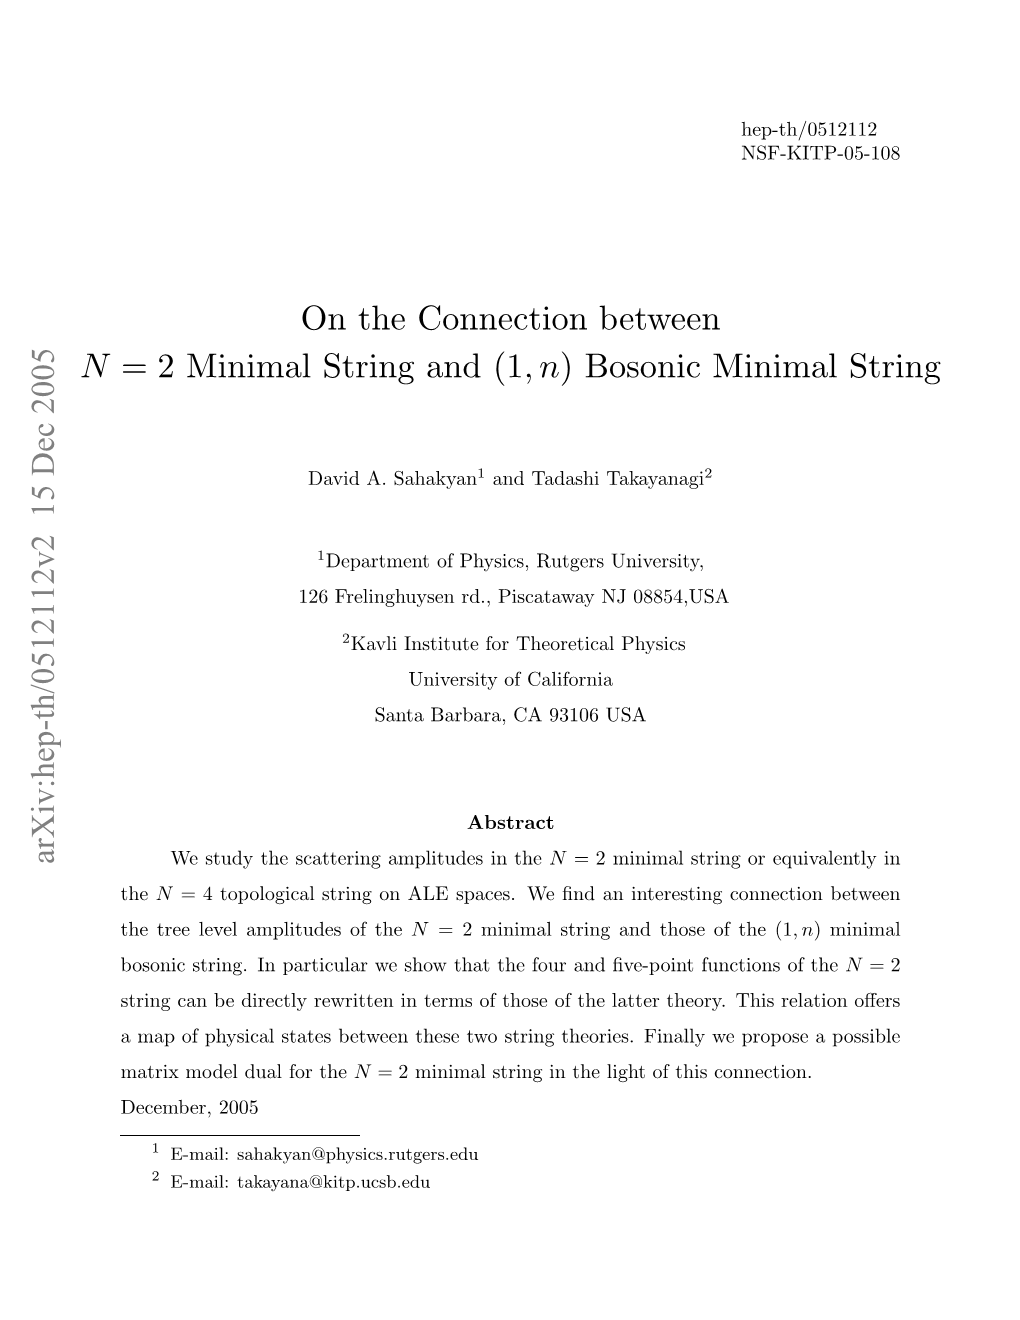 On the Connection Between N= 2 Minimal String and (1, N) Bosonic